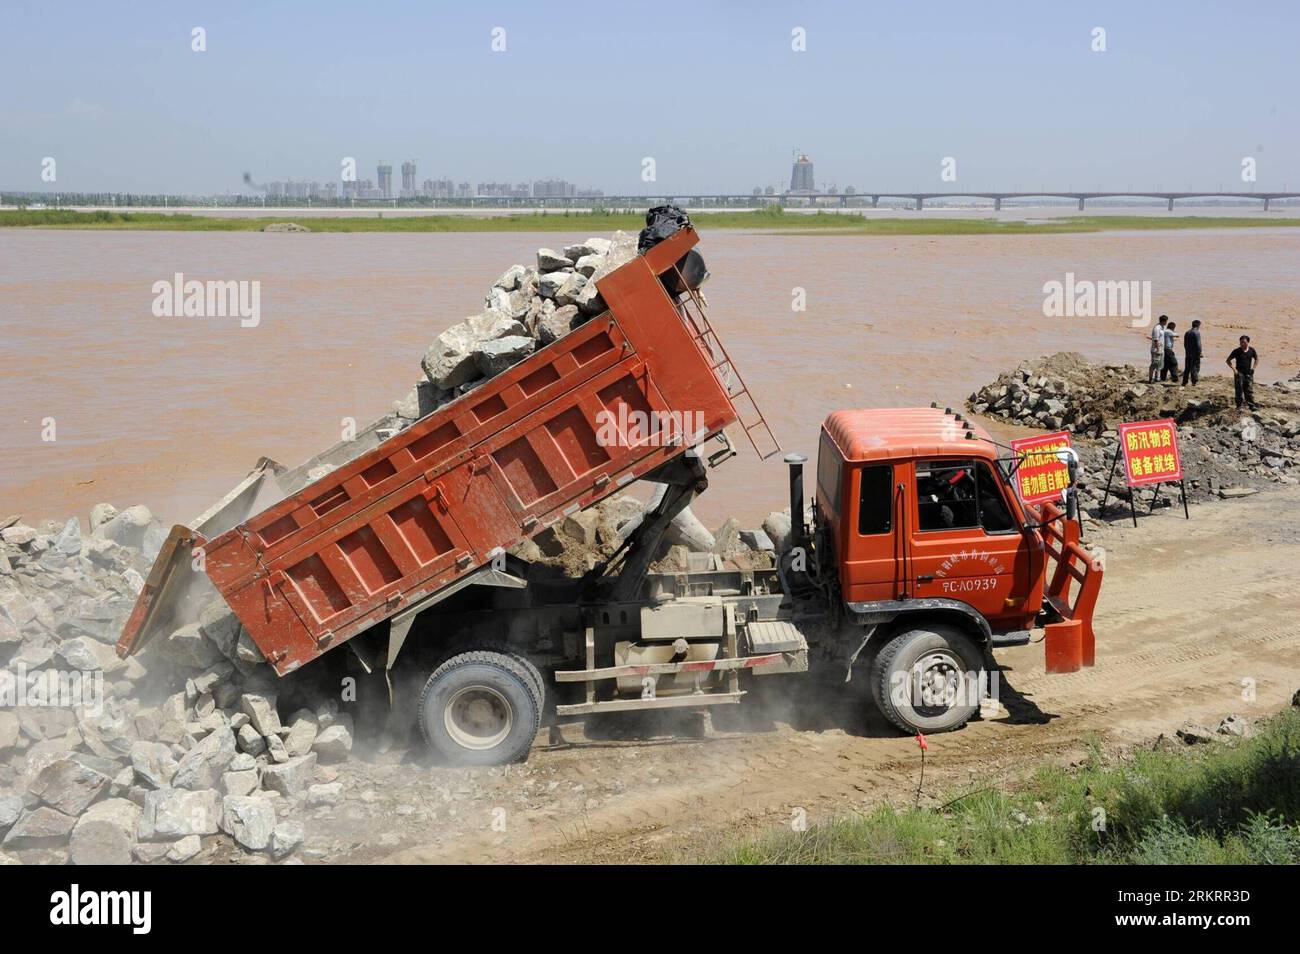 Bildnummer: 58298537  Datum: 01.08.2012  Copyright: imago/Xinhua (120801) -- YINCHUAN, Aug. 1, 2012 (Xinhua) -- A vehicle unloads stones to reinforce embankment in the Luojiahu section of the Yellow River in northwest China s Ningxia Hui Autonomous Region, Aug. 1, 2012. The highest flood peak of the Yellow River since 1989 hit the Ningxia section on Tuesday. Local flood control headquarters has initiated a level-three emergency response to cope with possible flooding. (Xinhua/Wang Peng)(mcg) CHINA-NINGXIA-FLOOD PEAK (CN) PUBLICATIONxNOTxINxCHN Gesellschaft Hochwasser Gelber Fluss Huanghe Vorbe Stock Photo